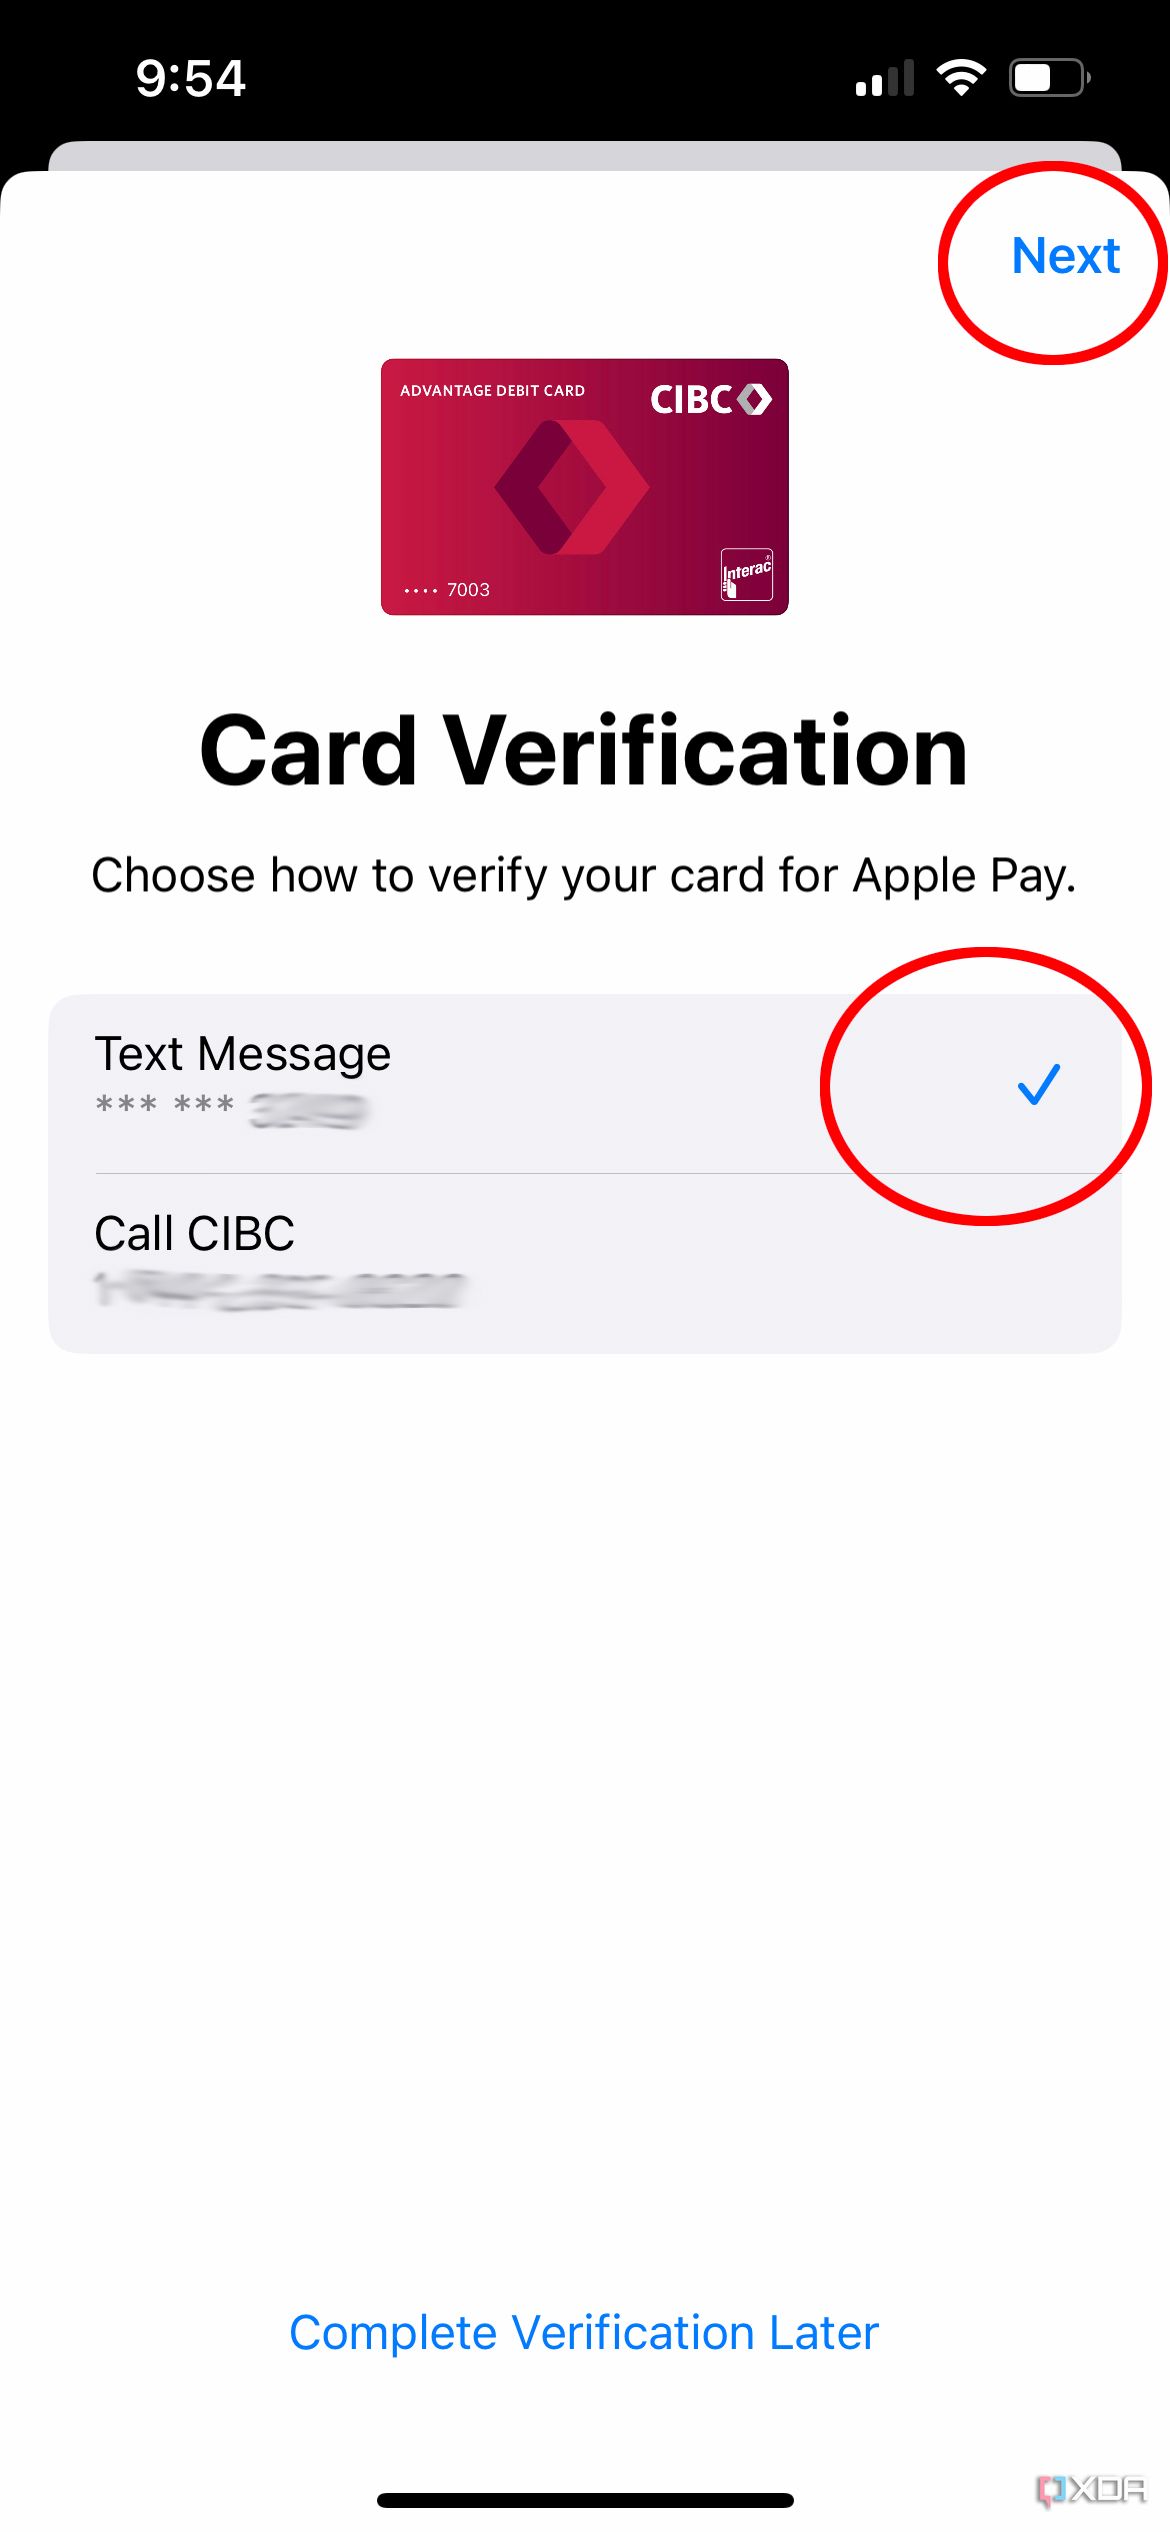 The card verification page when adding a card to Apple Wallet.